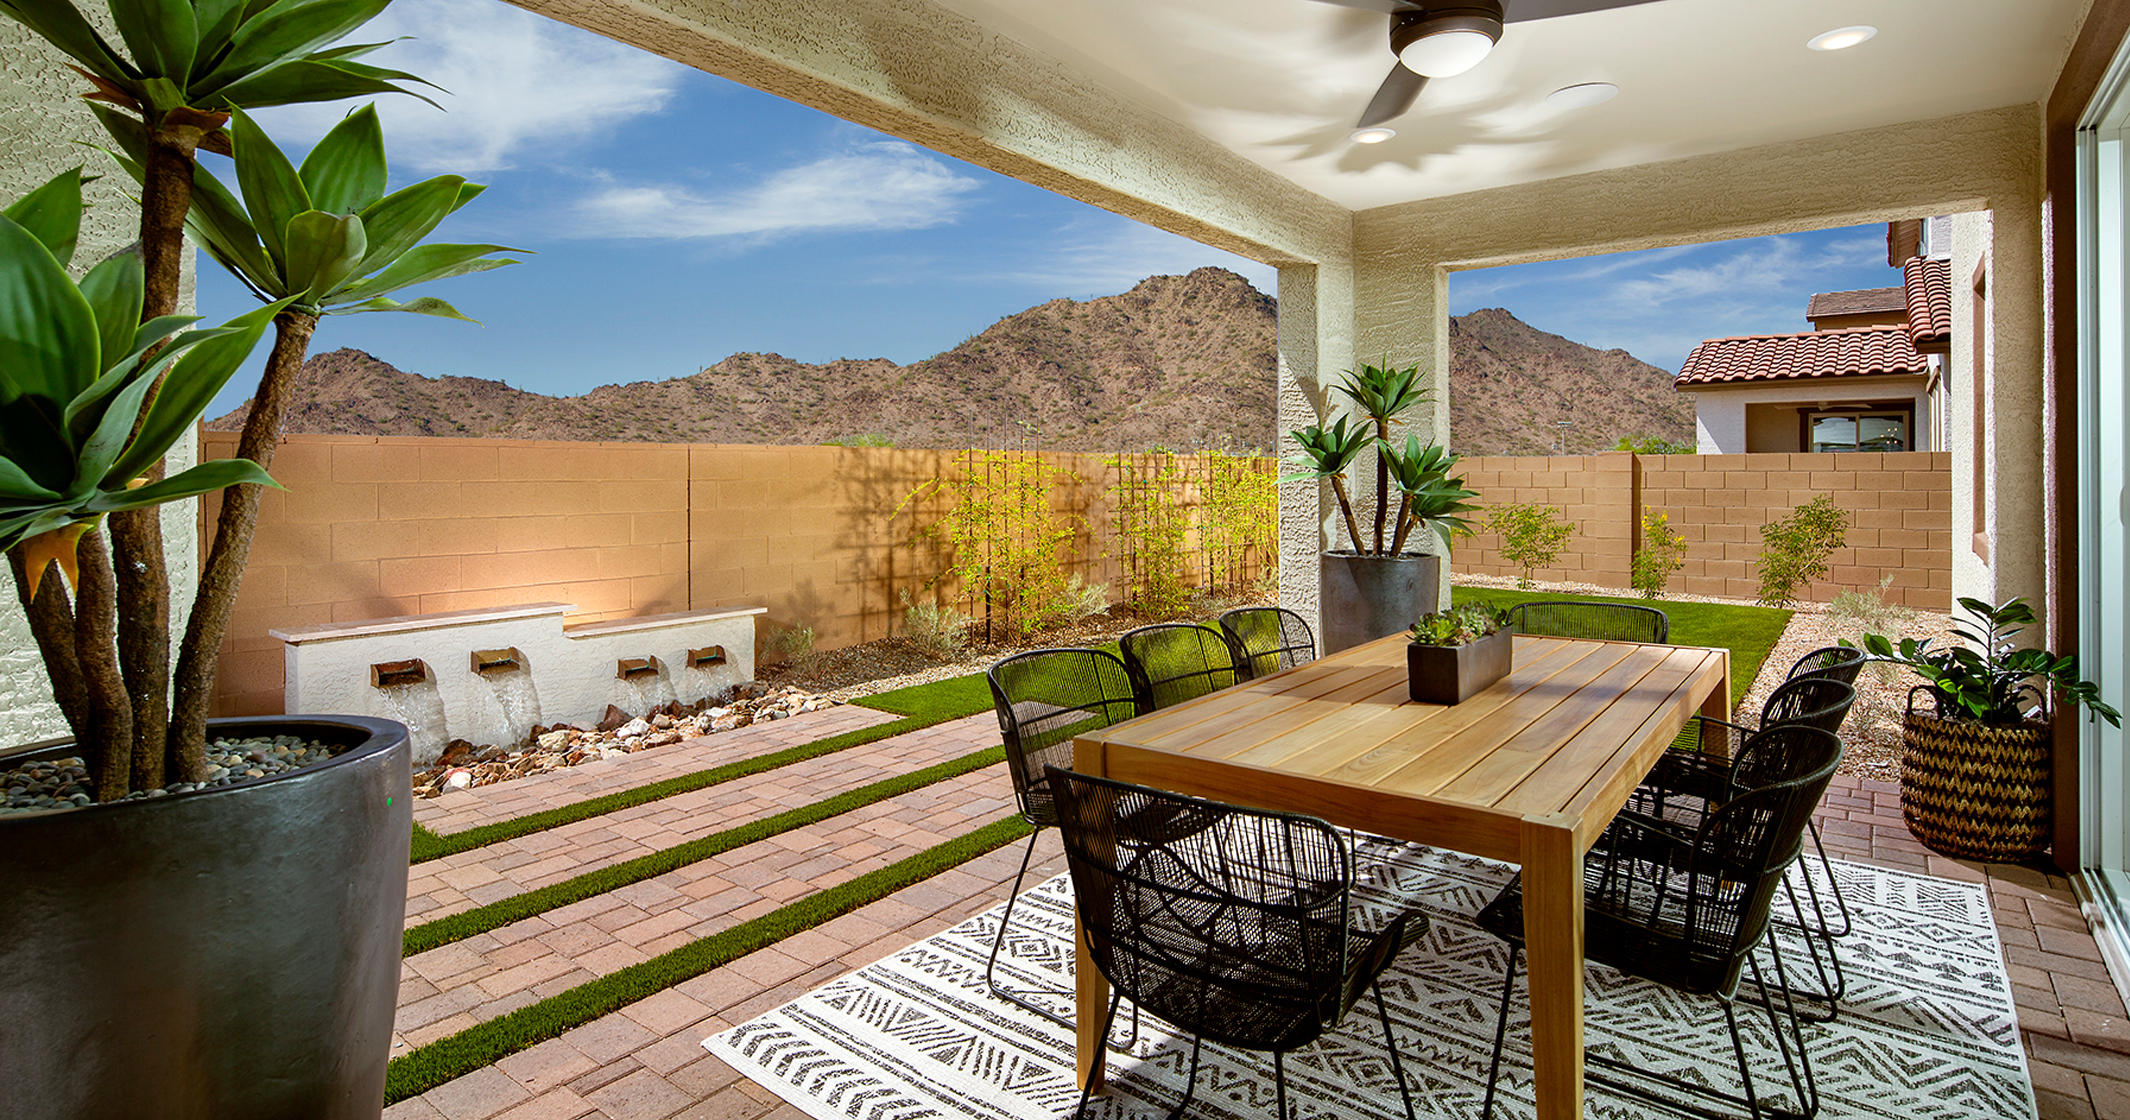 Plan 1 Model Home Outdoor Space